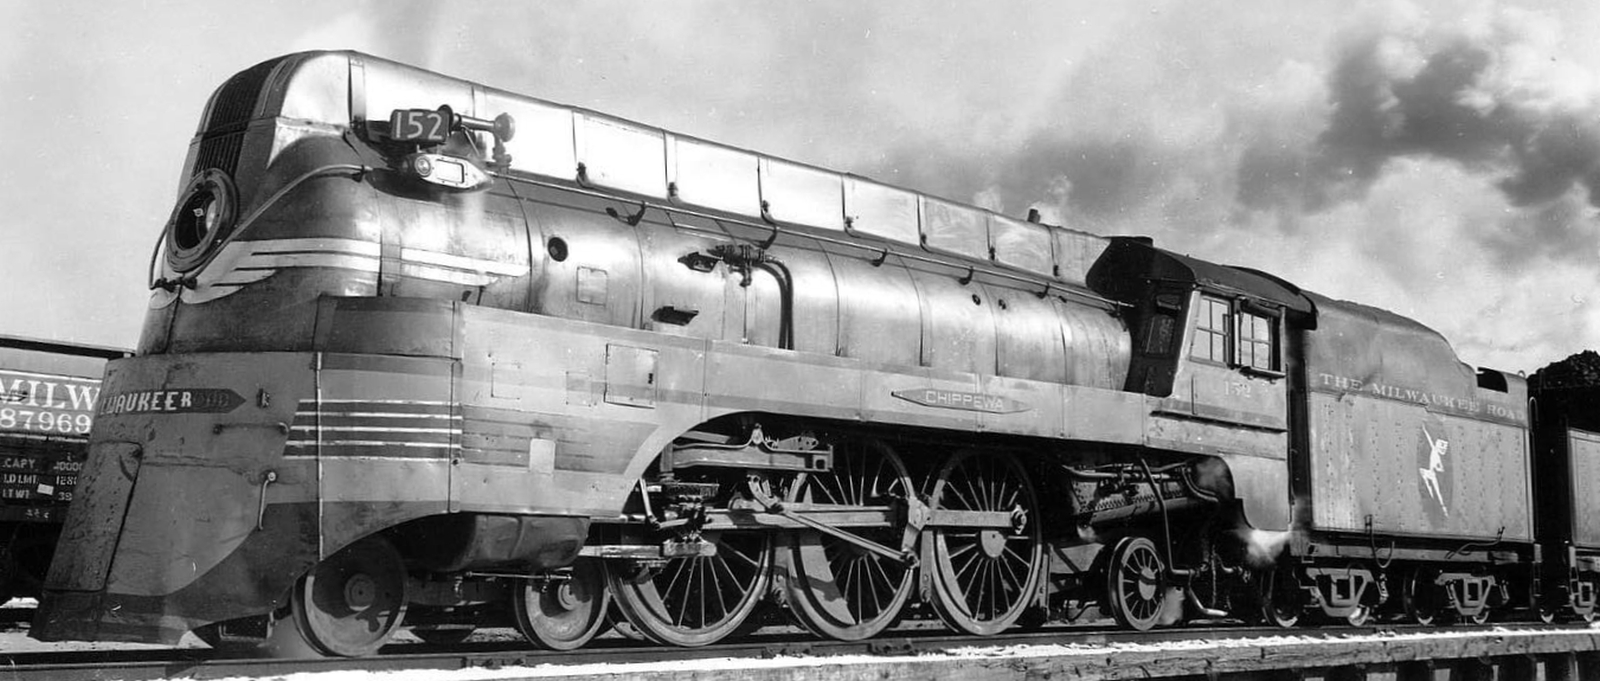 No. 152 with retrofitted streamlining in November 1953 in Madison, Wisconsin